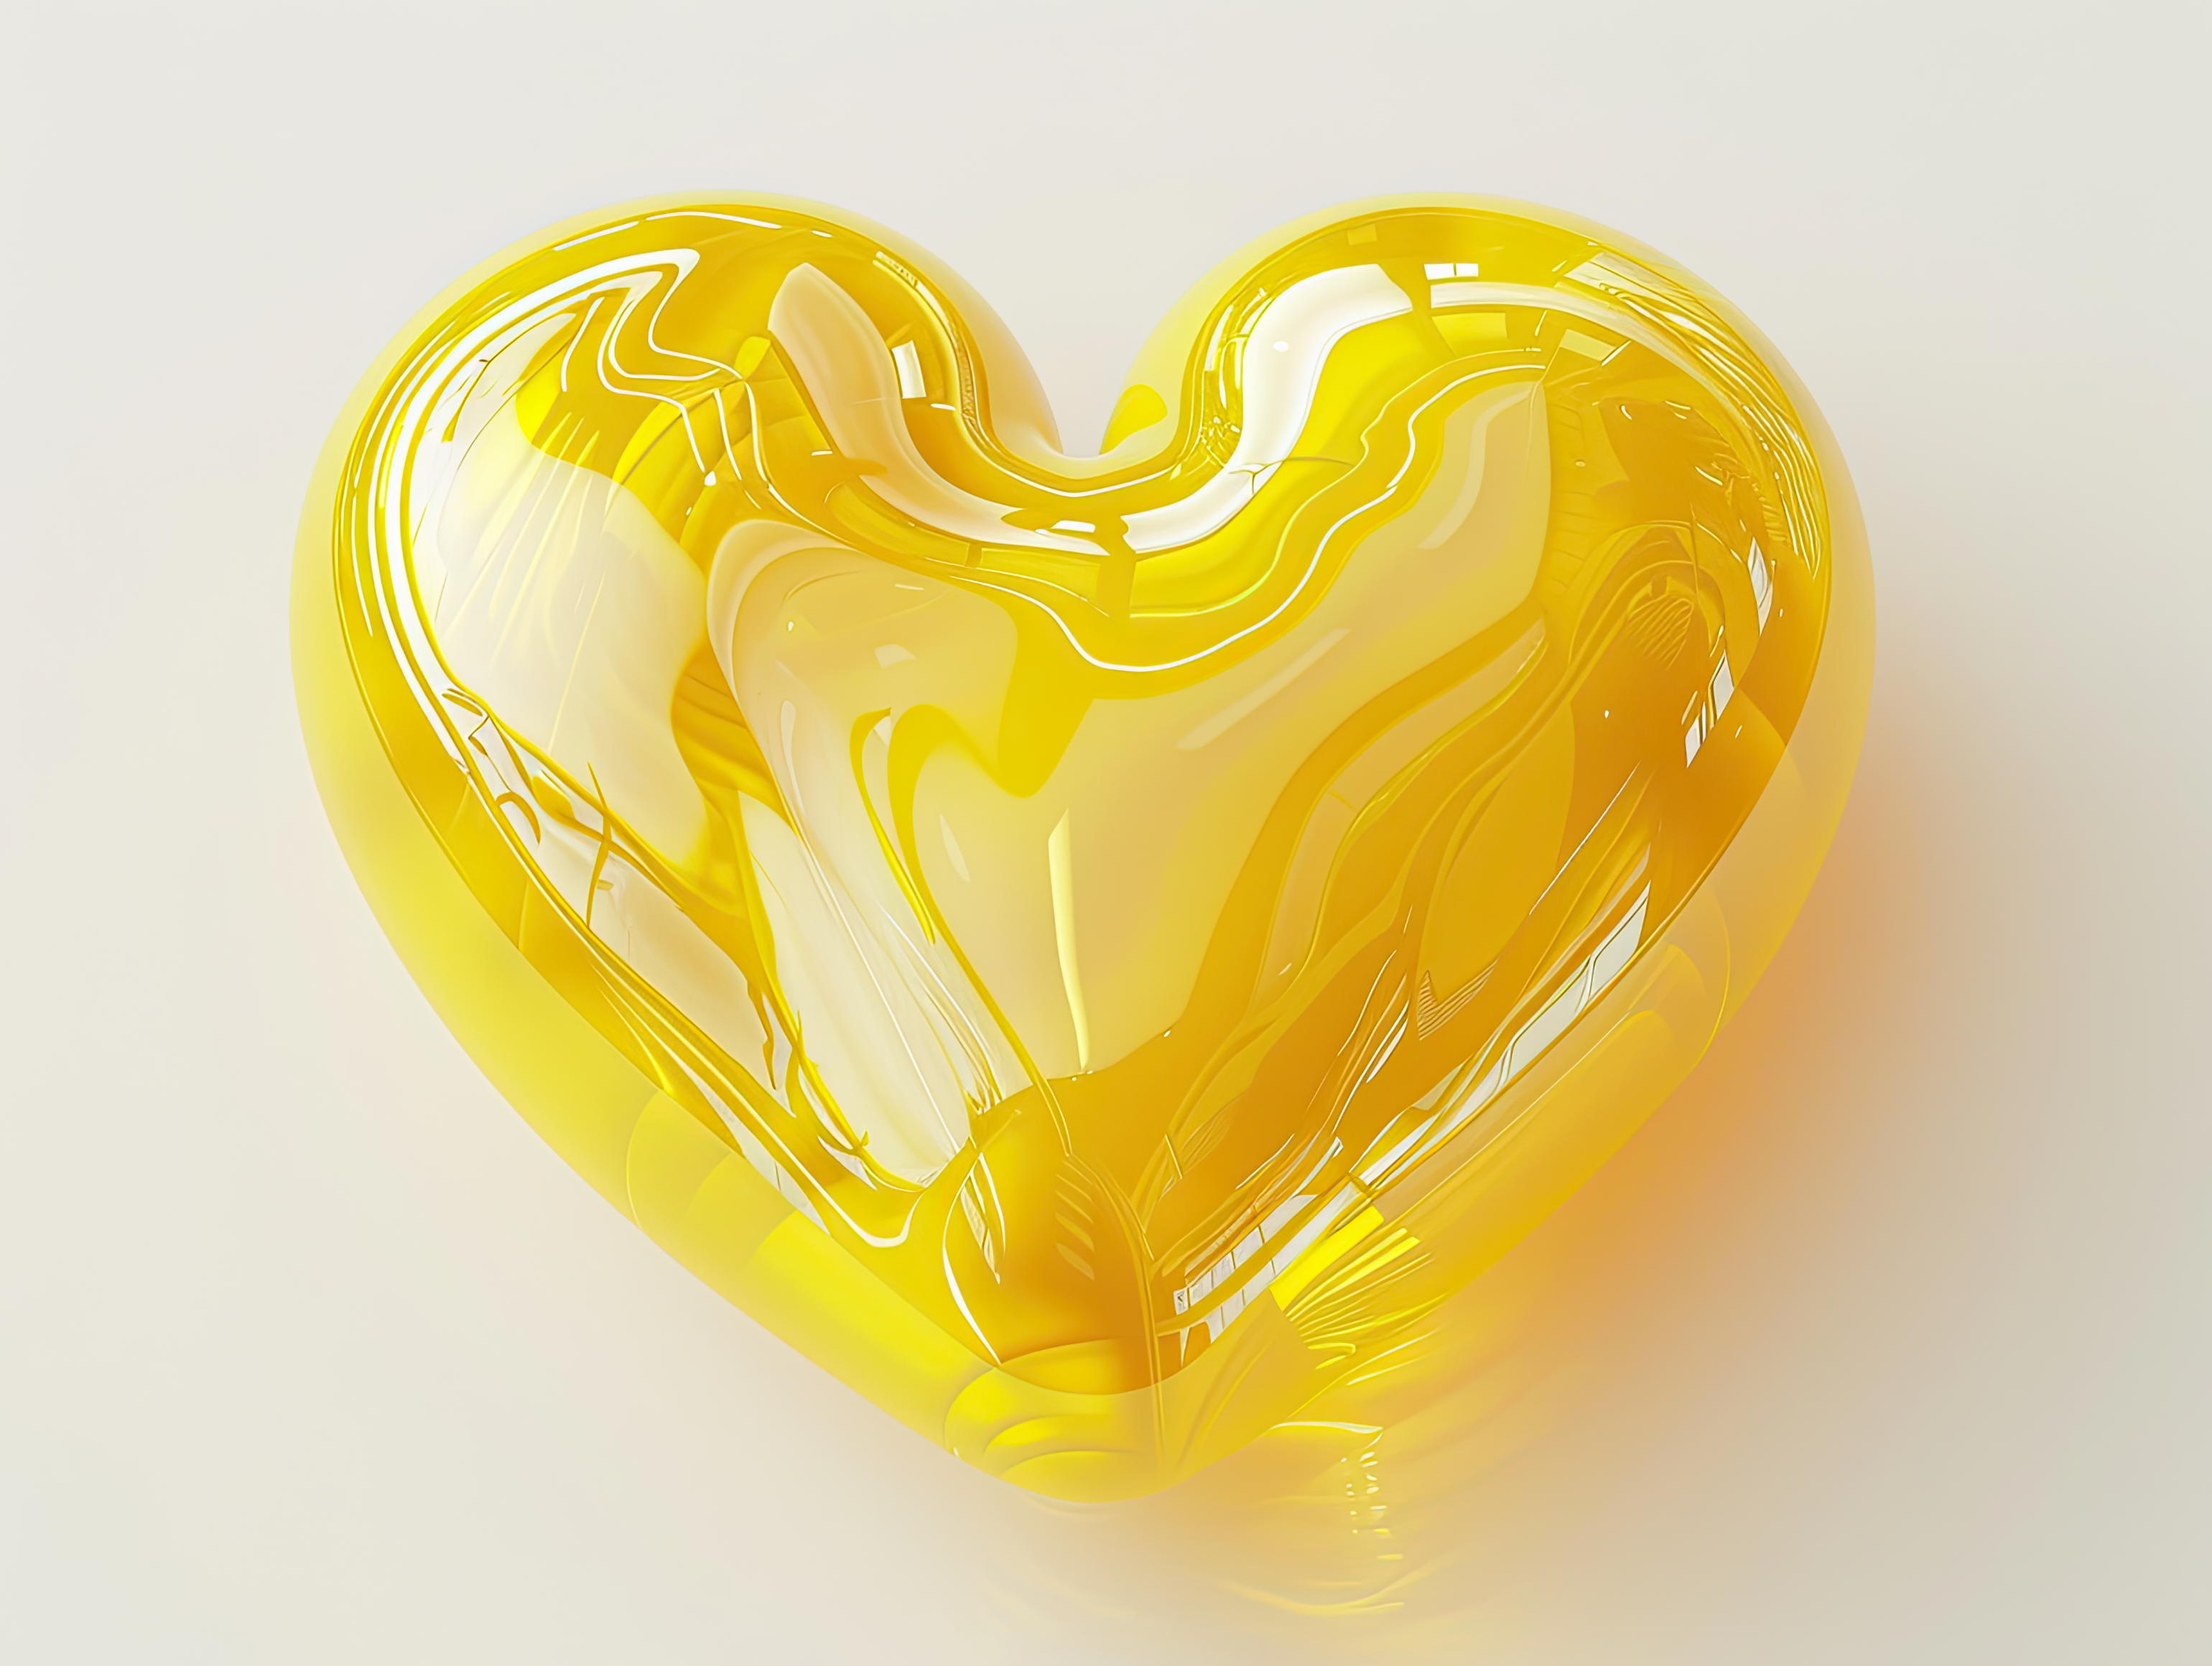 Yellow heart, Love, wedding, marriage ceremony and Valentine's Day romantic celebration 3d concept